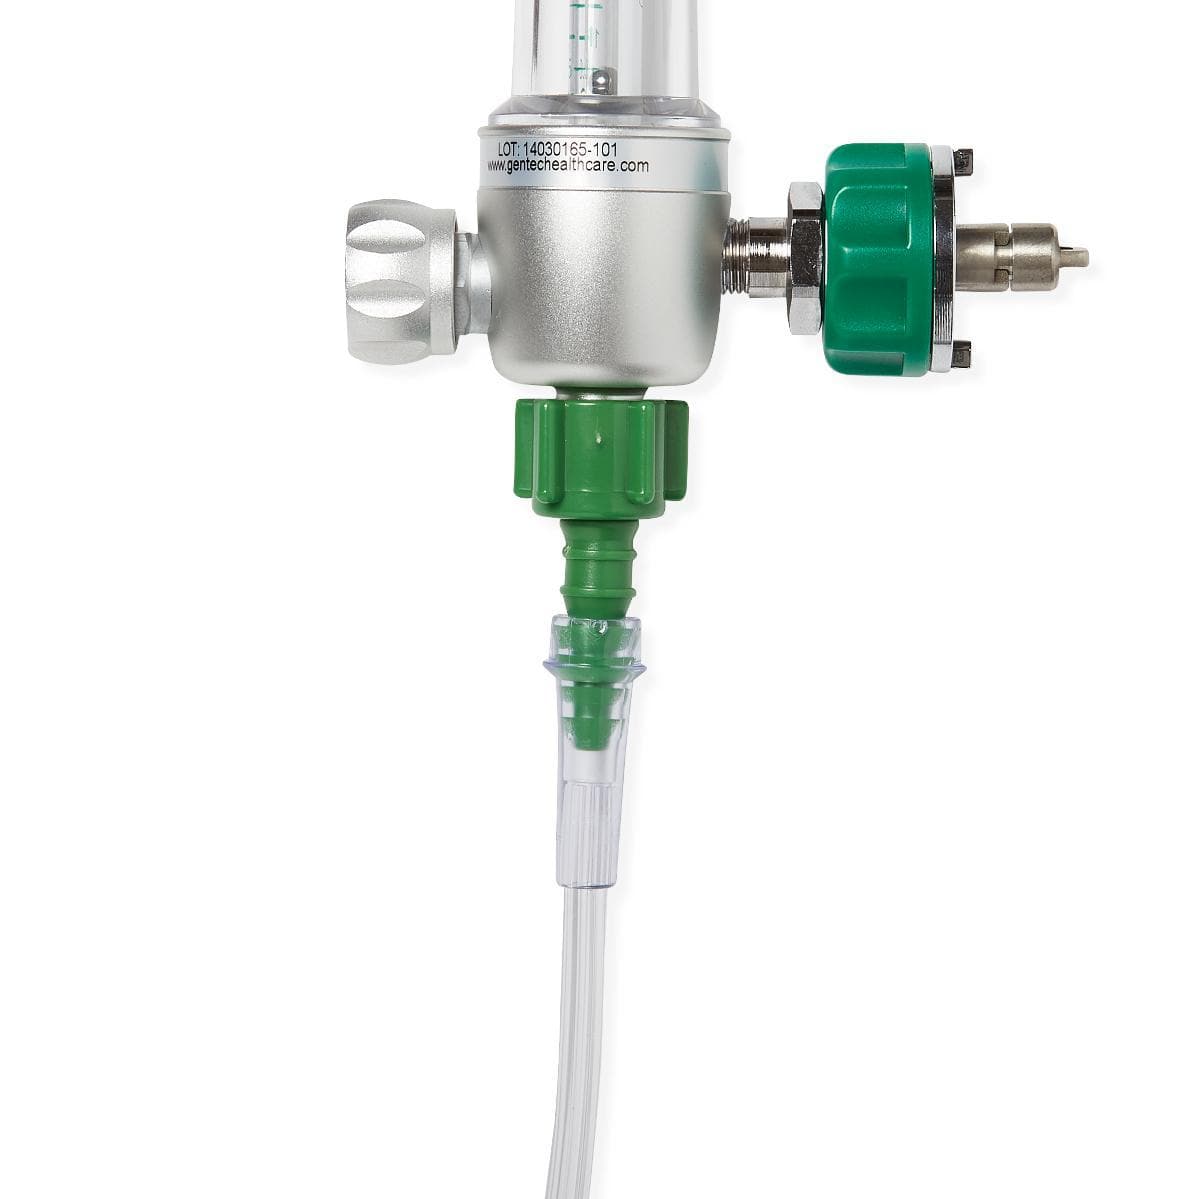 Medline Clear Oxygen Tubing with Standard Connector - Crush Resistant - Senior.com Oxygen Tubing